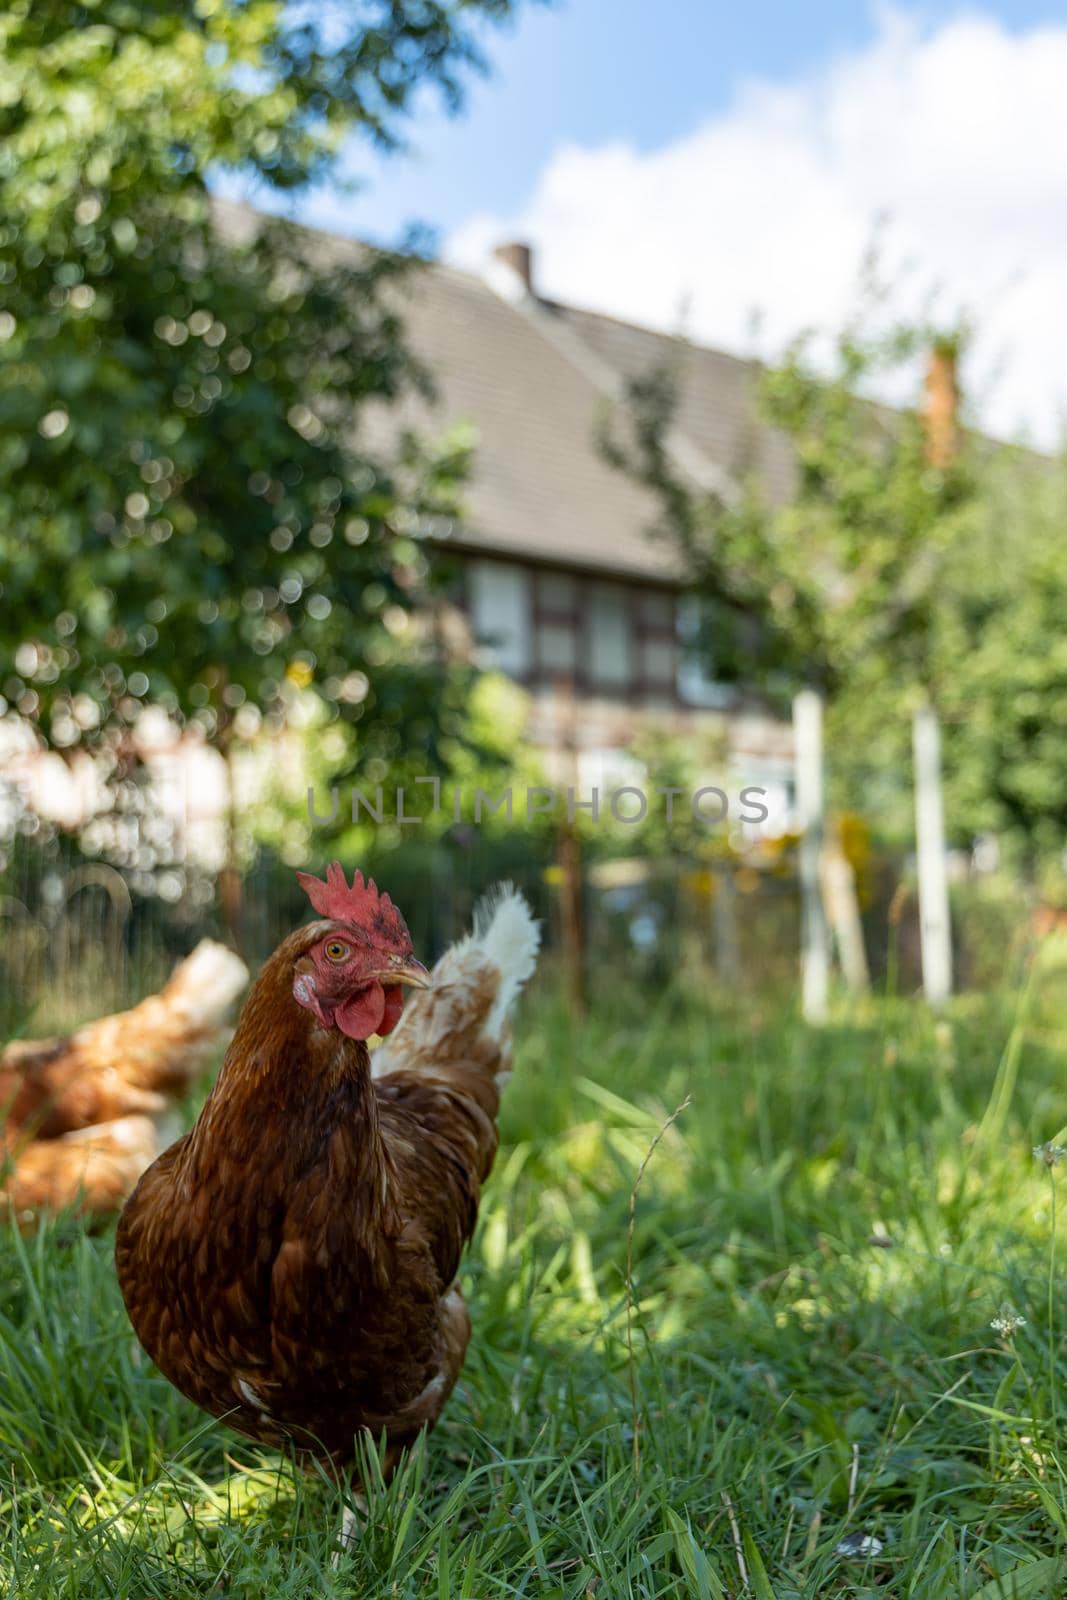 Free range organic chickens poultry in a country farm